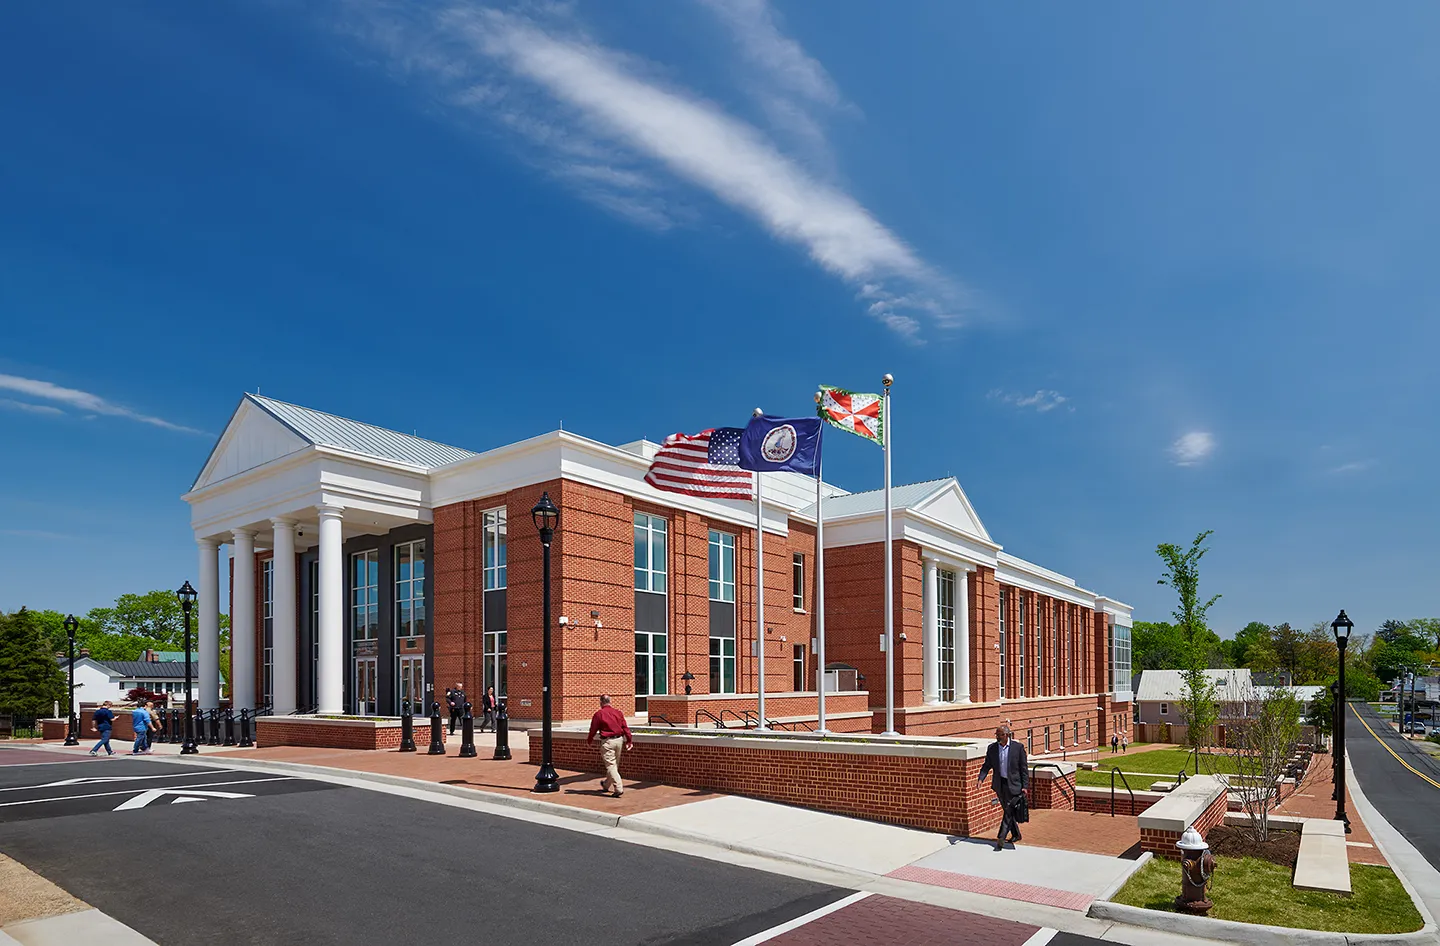 The project included design and construction of a new district courts building, renovation to two existing historic courts buildings, and the design and construction of a structured parking garage.